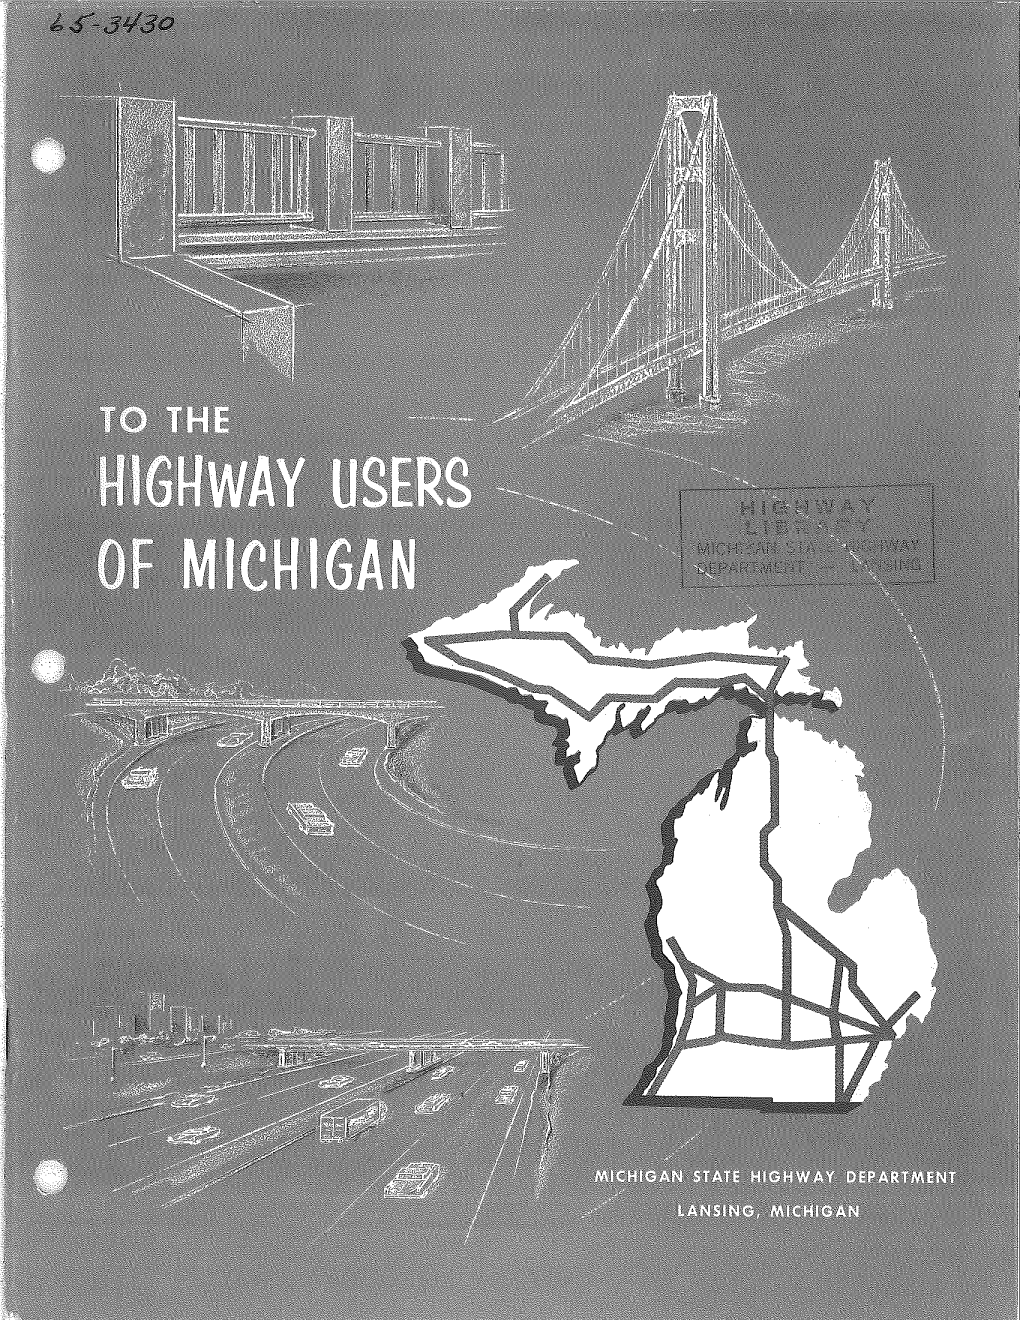 An Annual Report to the Highway Users of Michigan